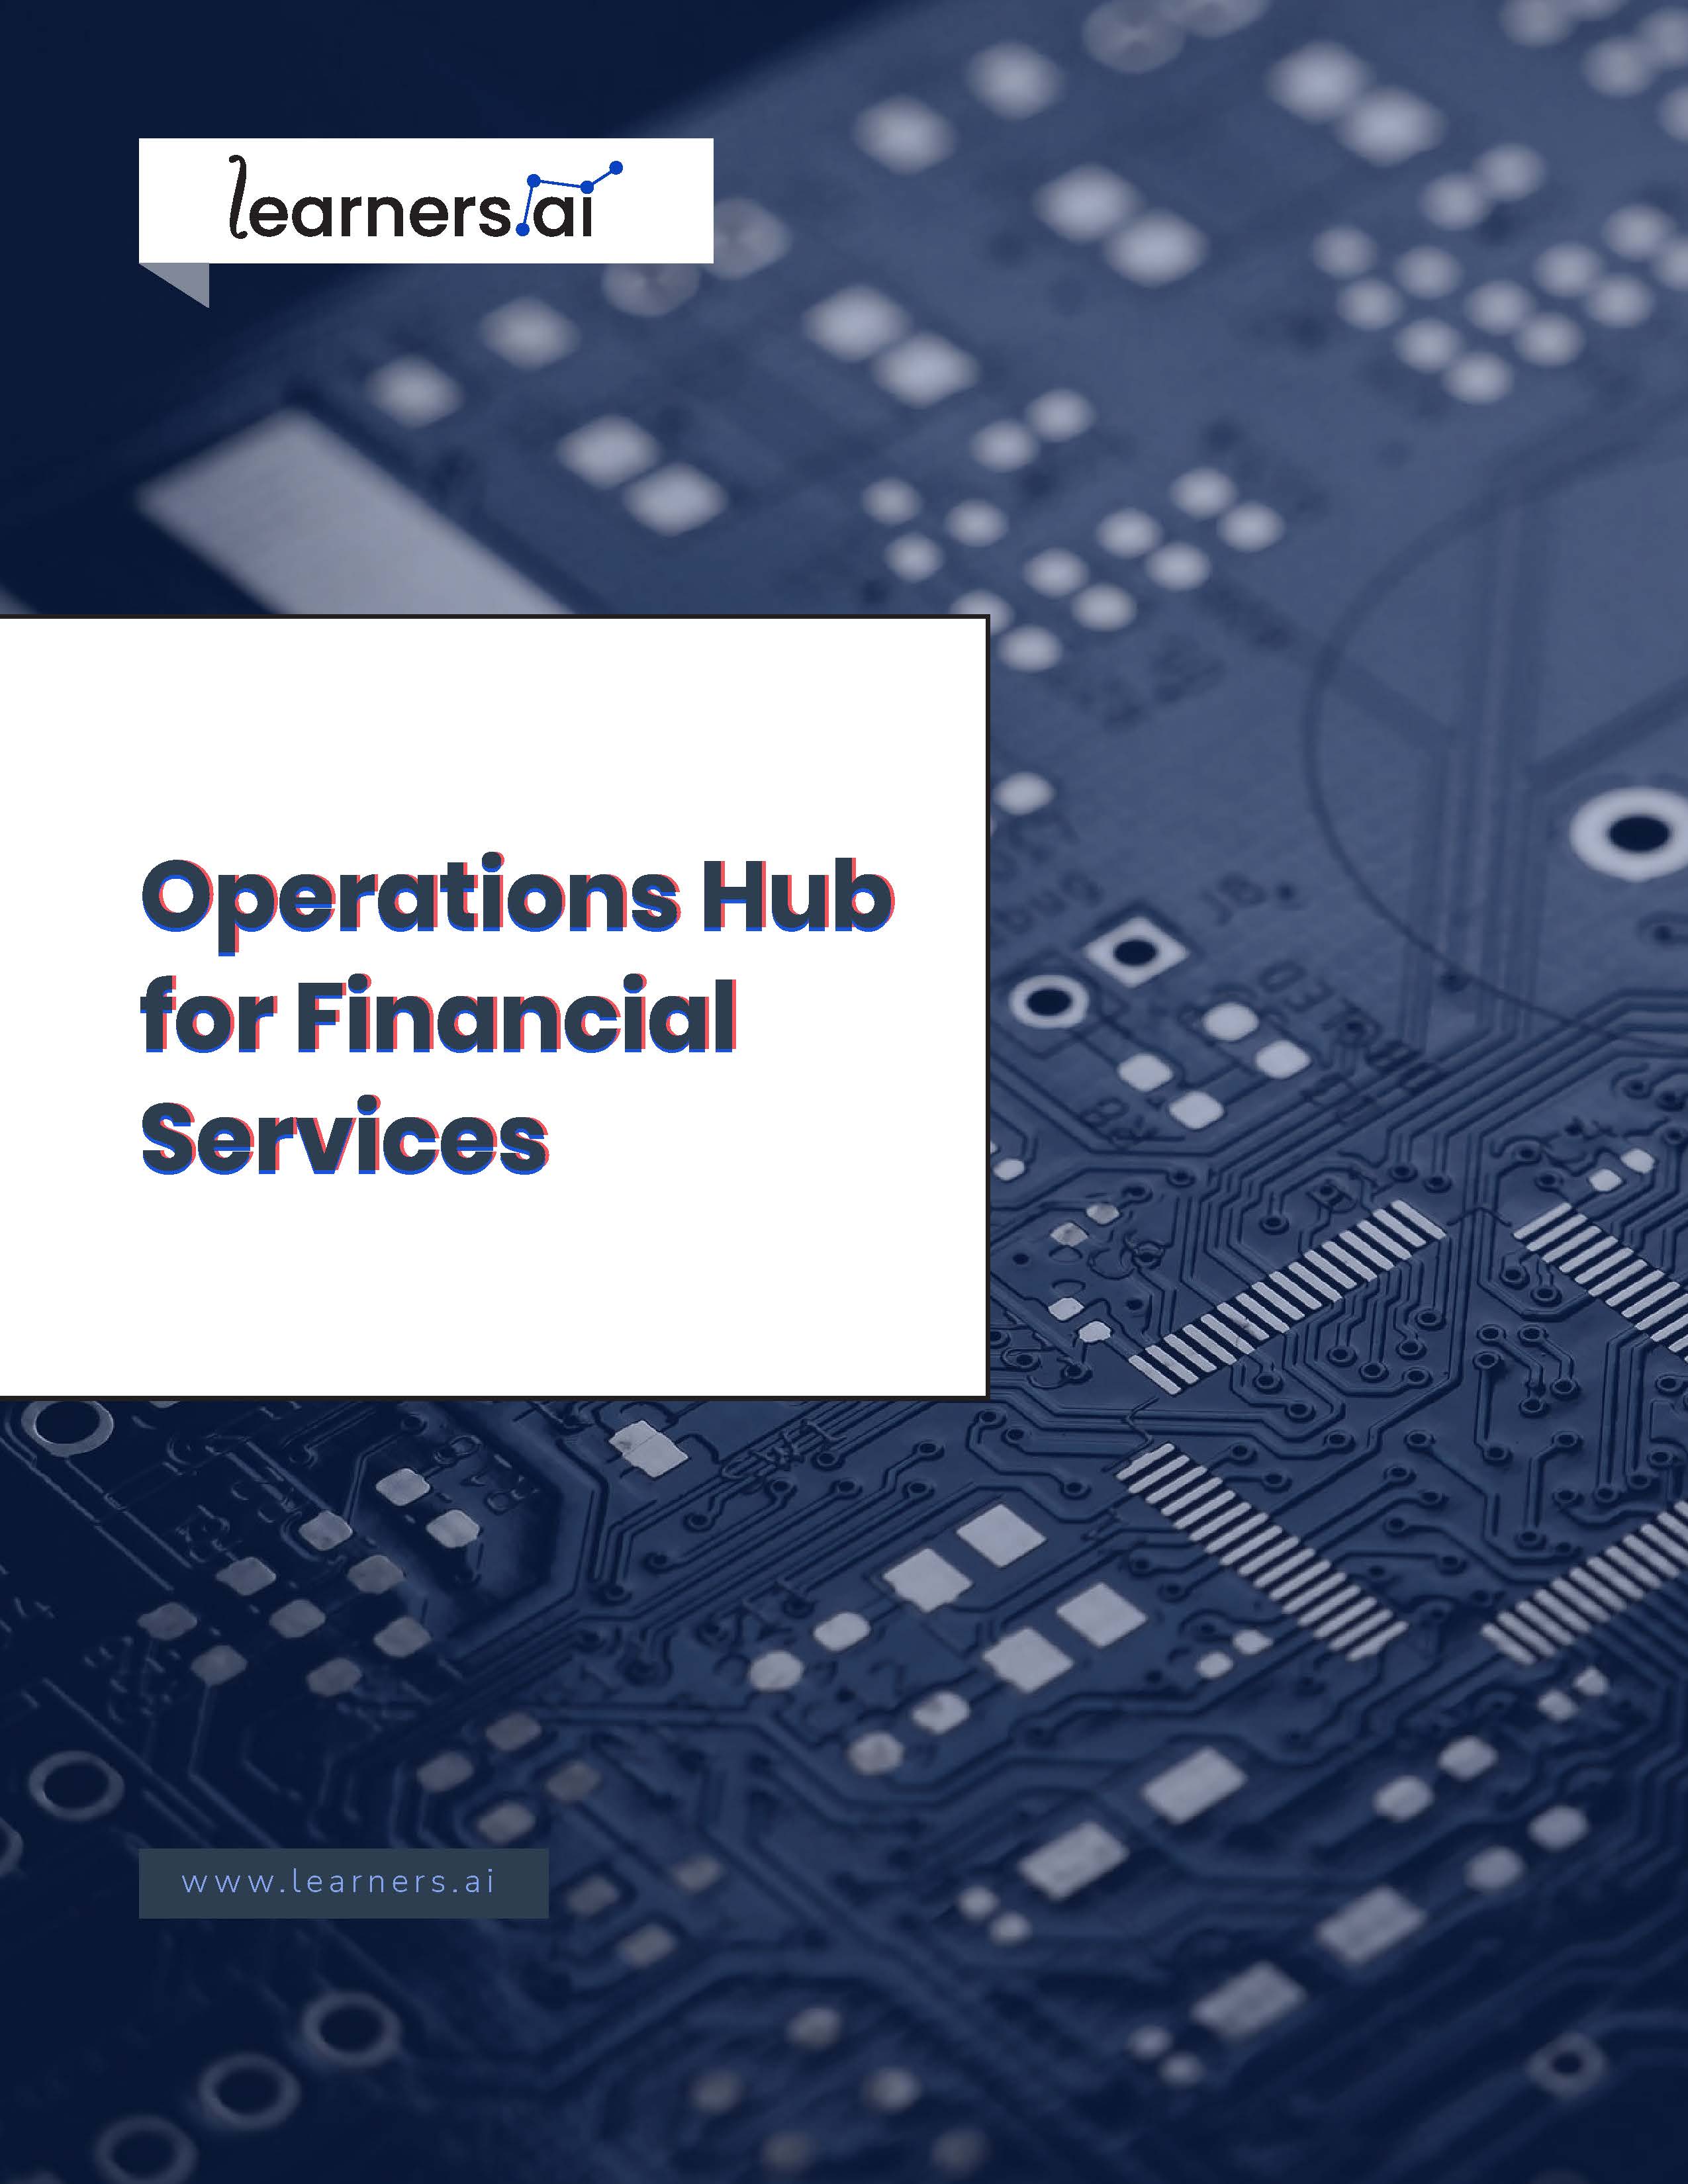 Operations Hub for Financial Services Financial services companies are struggling with data silos, poor data governance, aging legacy tech, and stalled digital transformation efforts. Your business needs help—but how? HubSpot’s new Operations Hub CRM software is the first-ever dedicated tool for powering RevOps. From enriching your customer data to building automated workflows, Operations Hub makes it all possible.